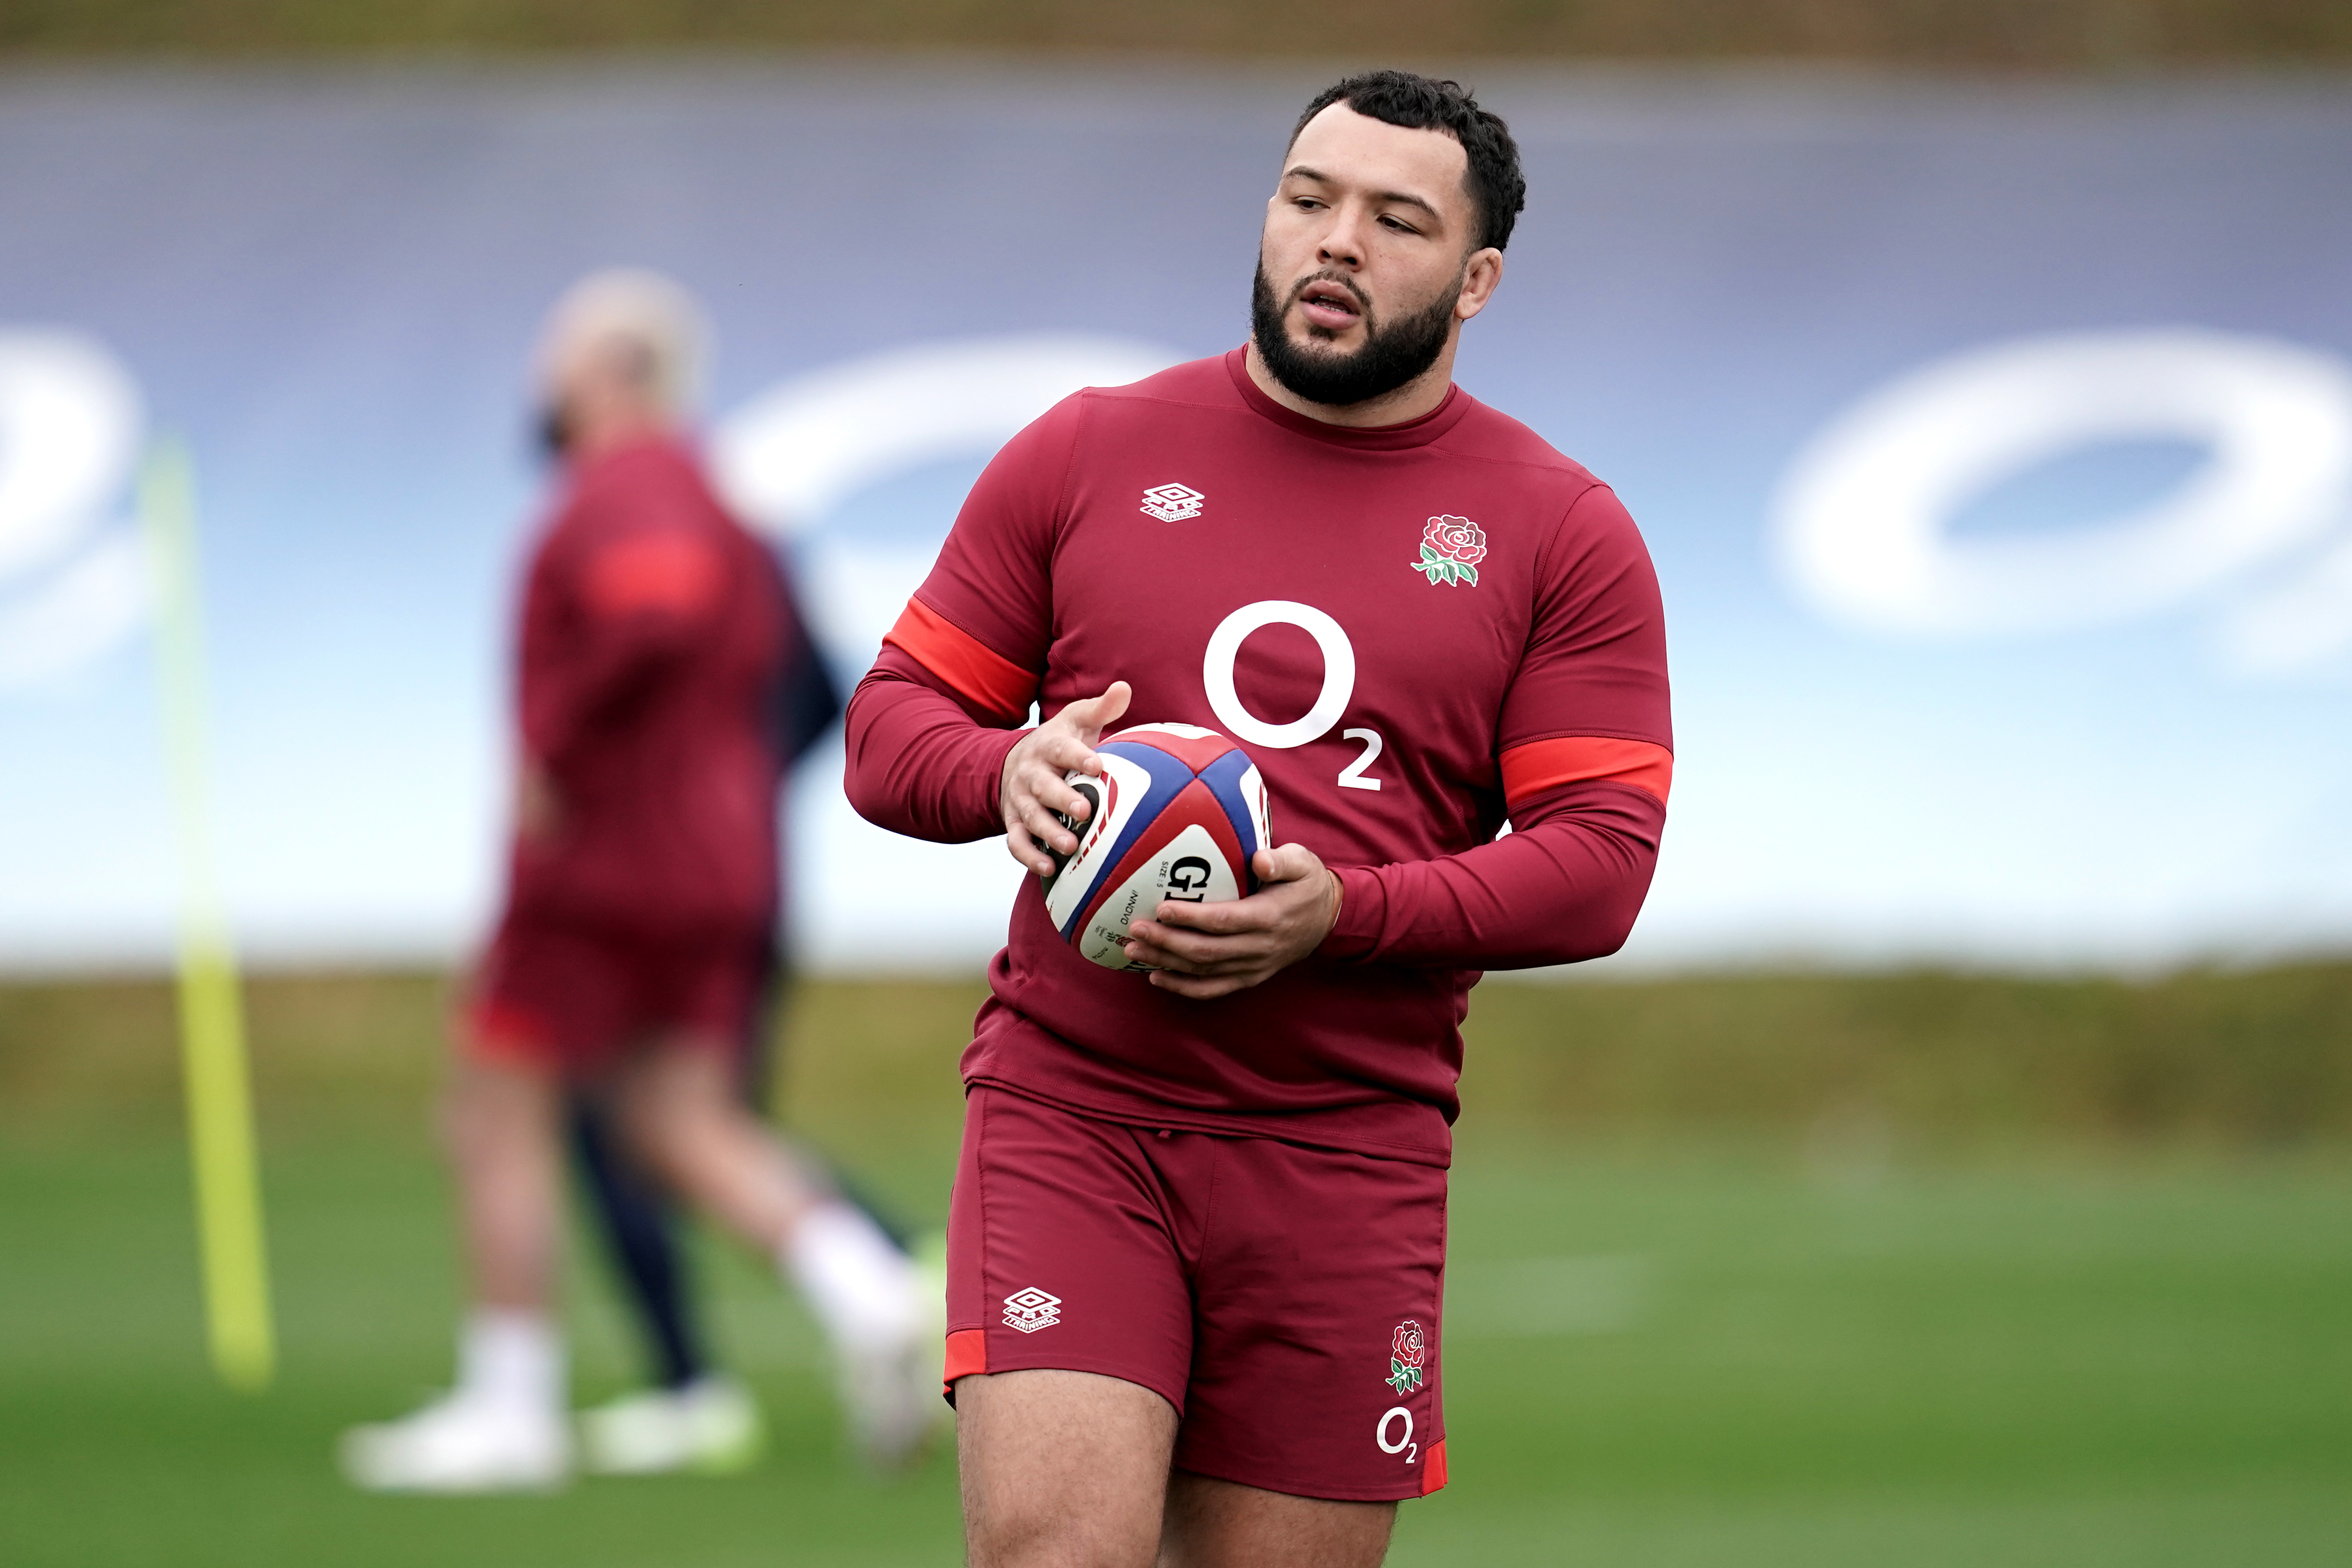 Ellis Genge returns to the bench after his late withdrawal last weekend